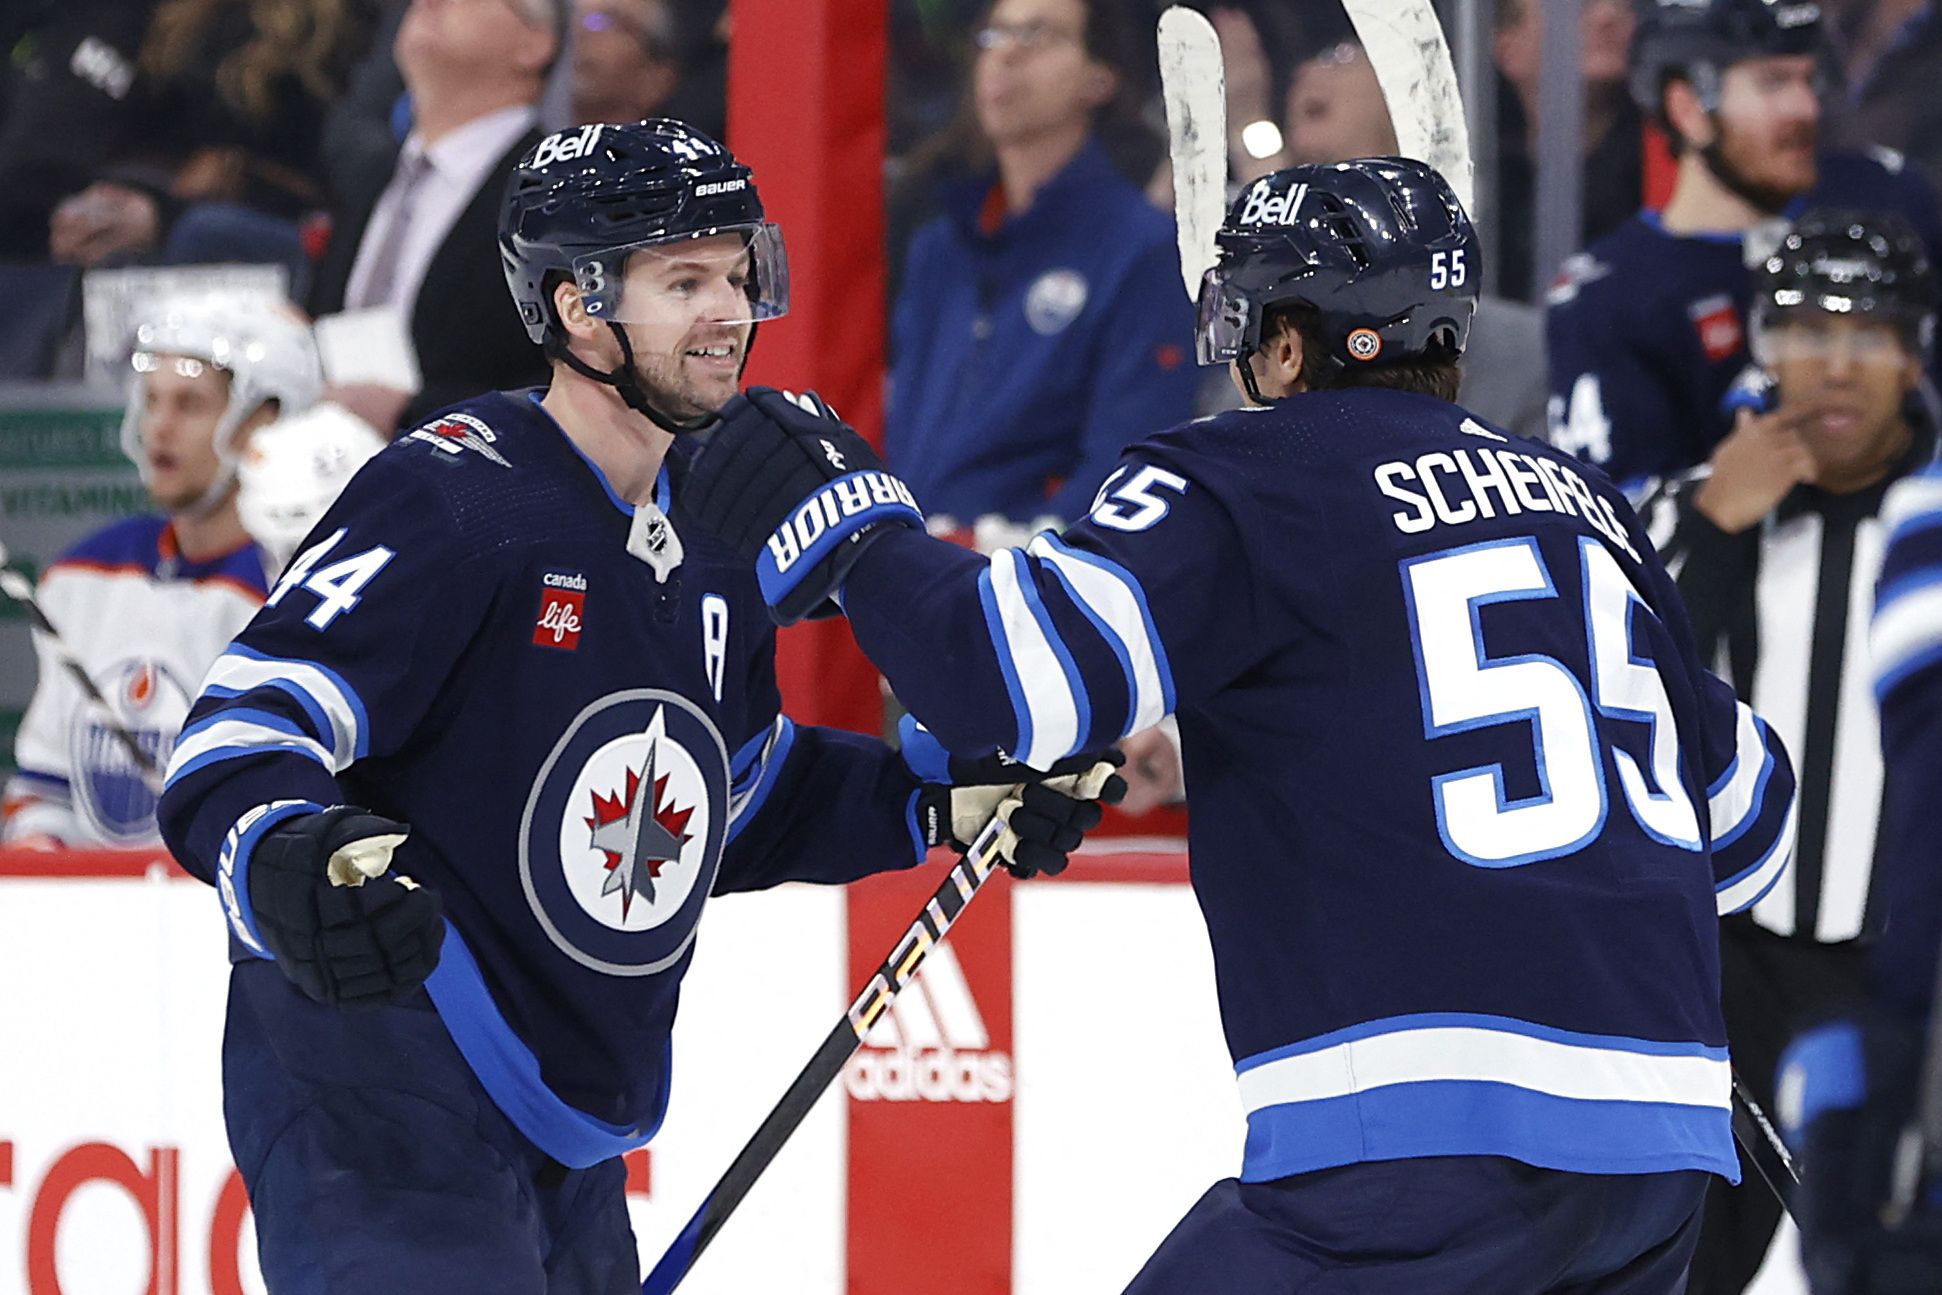 Jets' Mark Scheifele day-to-day, could play in must-win Game 5